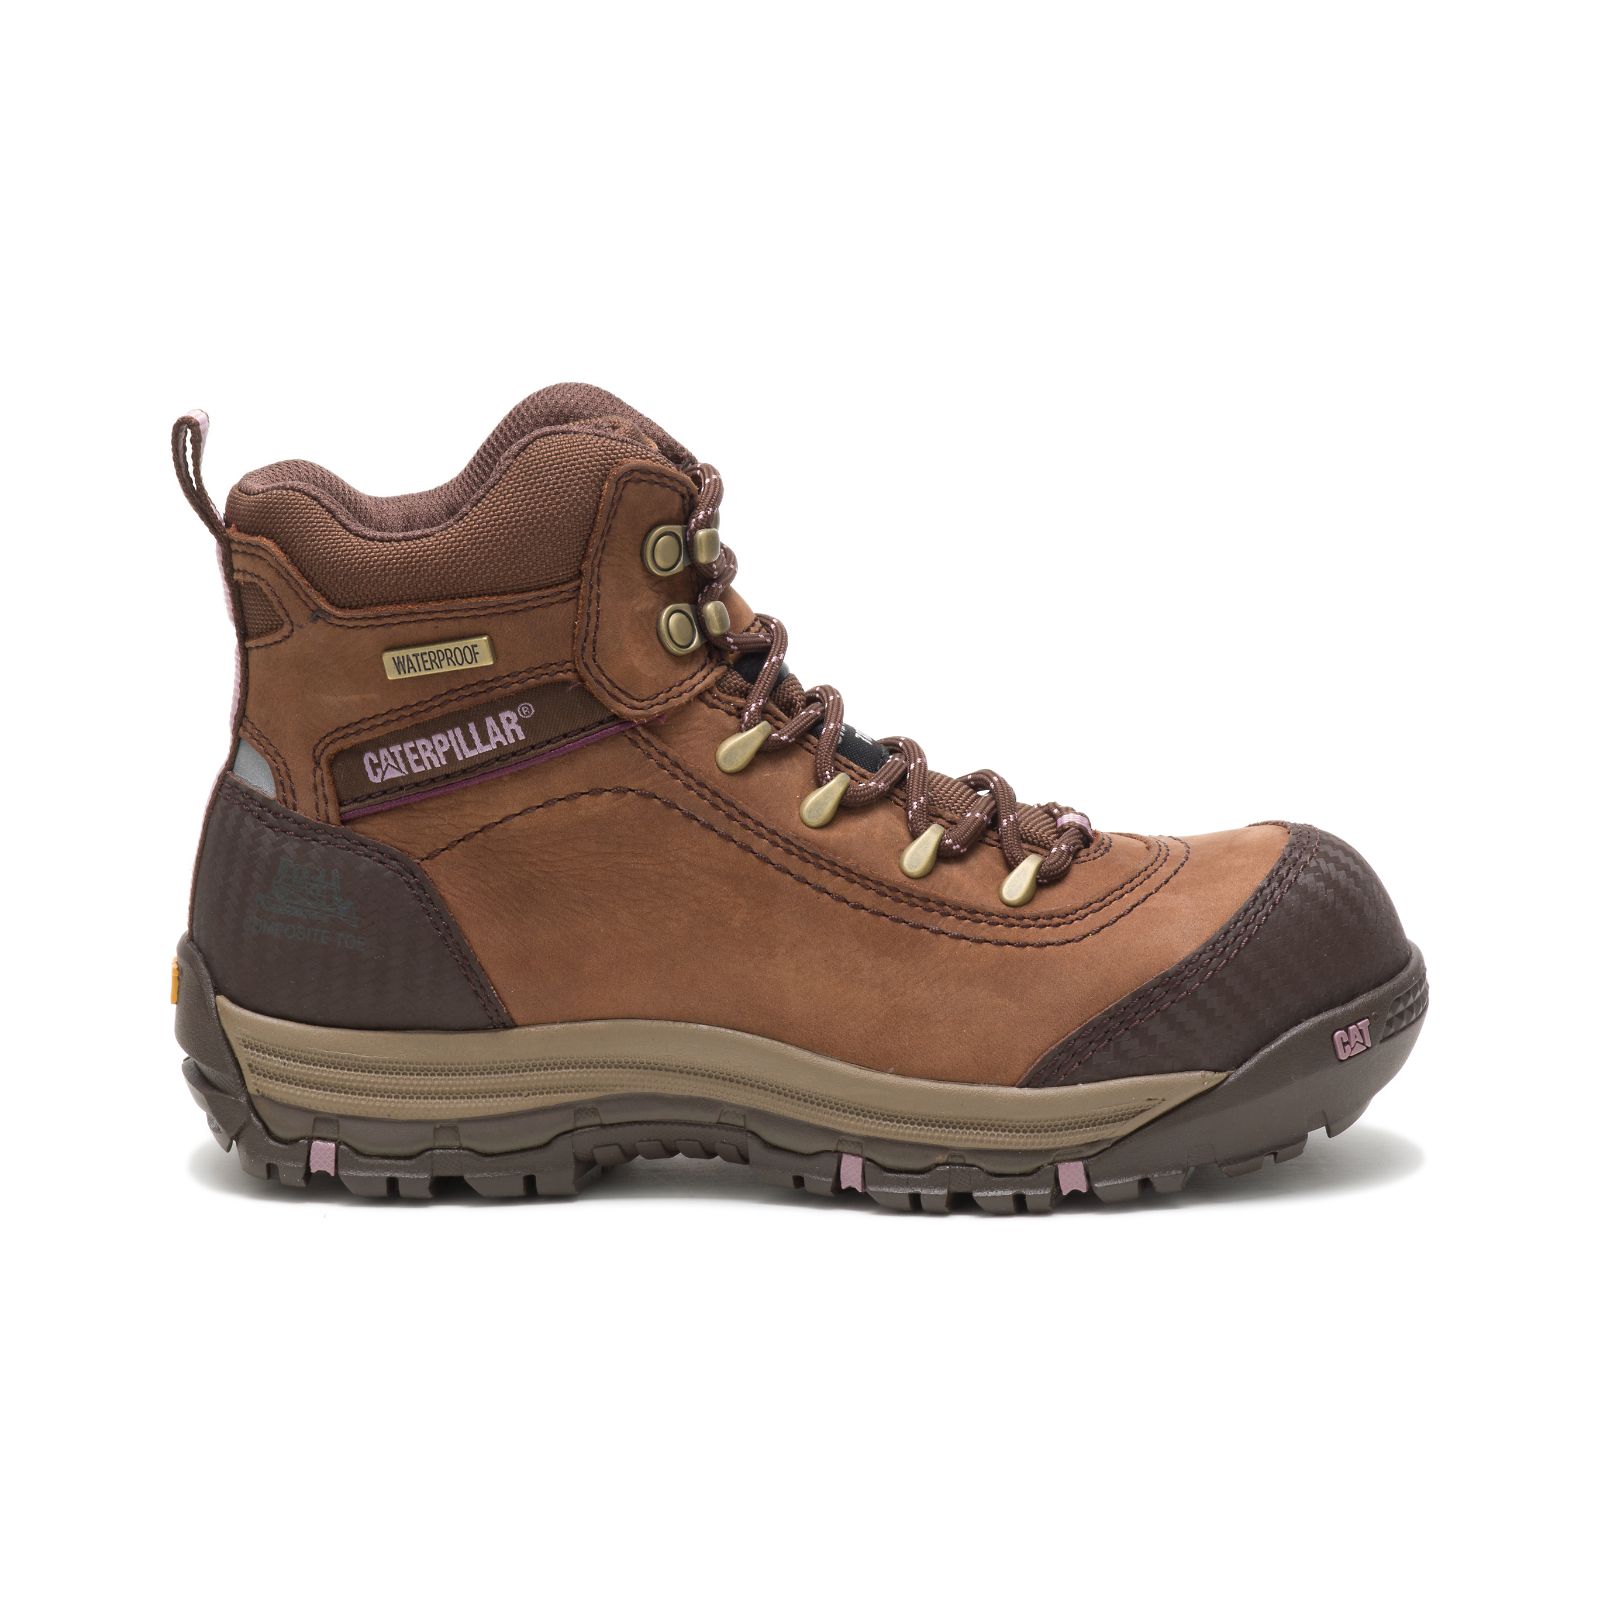 Caterpillar Ally Waterproof Composite Toe - Womens Work Boots - Brown - NZ (854OQNZLY)